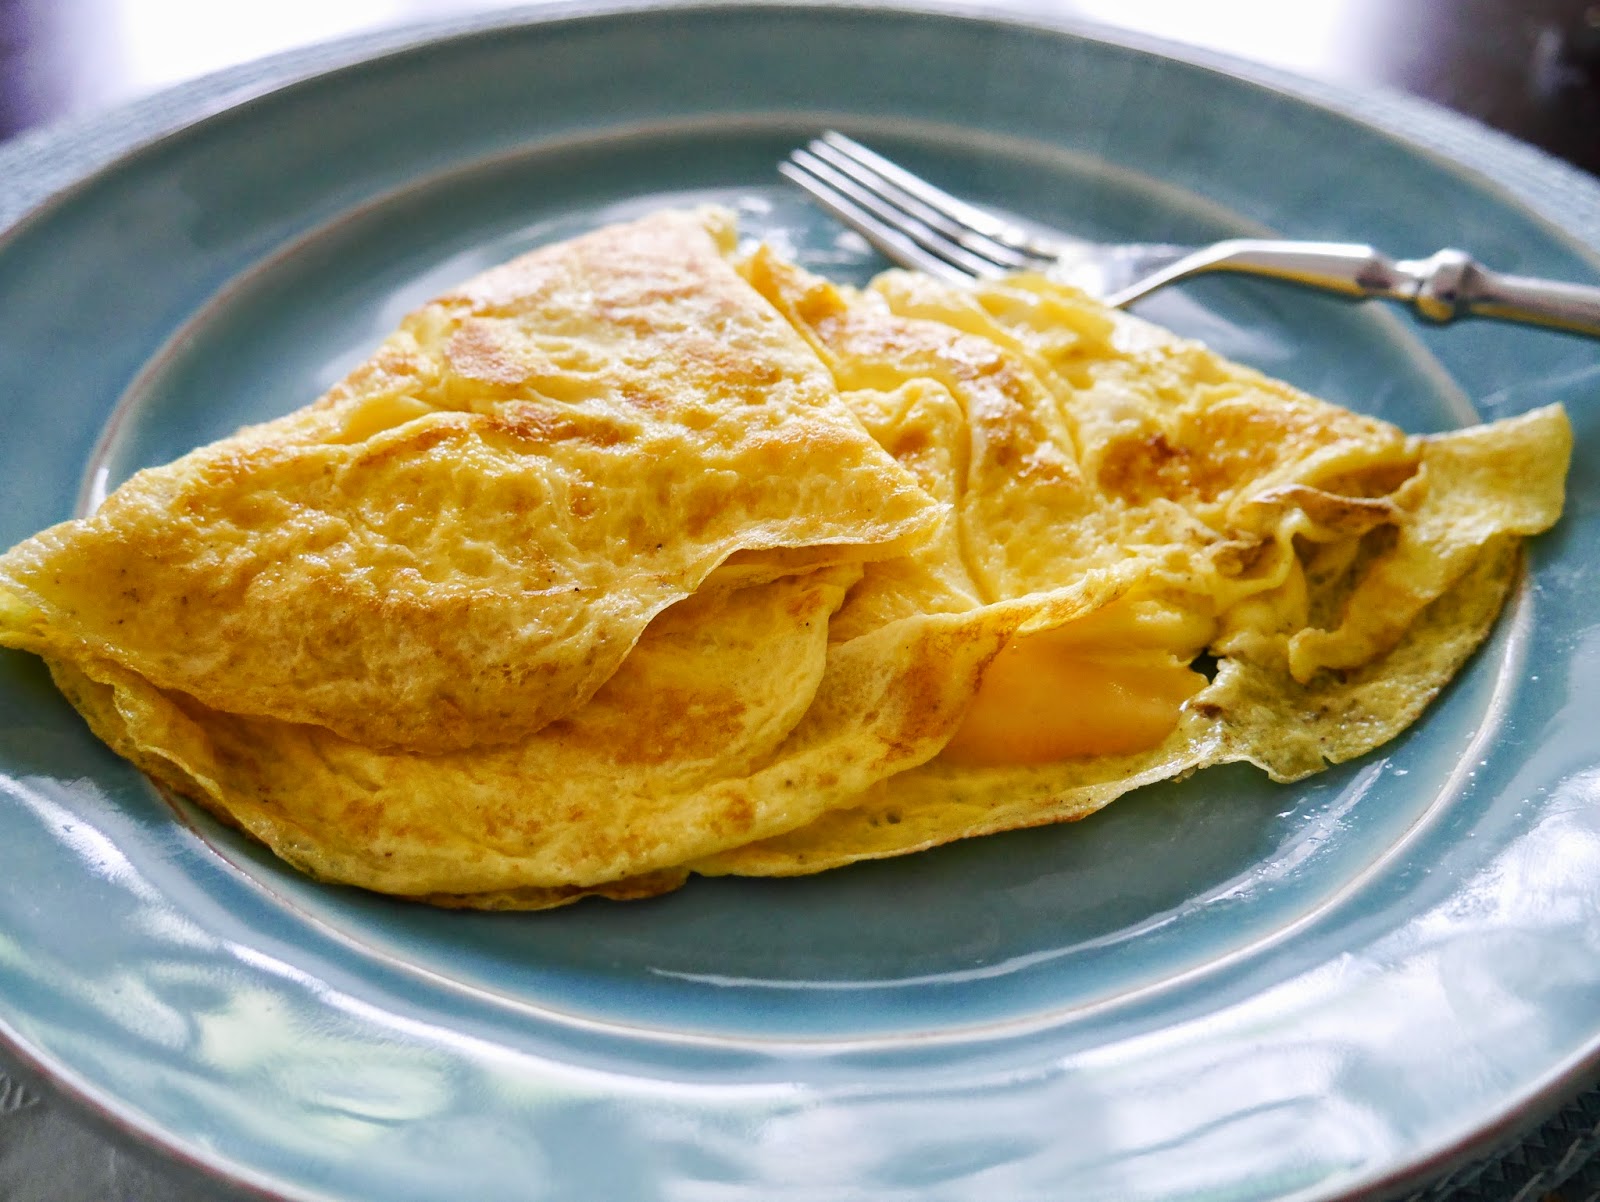 FEAST EVERYDAY: How to Make a Dreamy Cheese Omelette